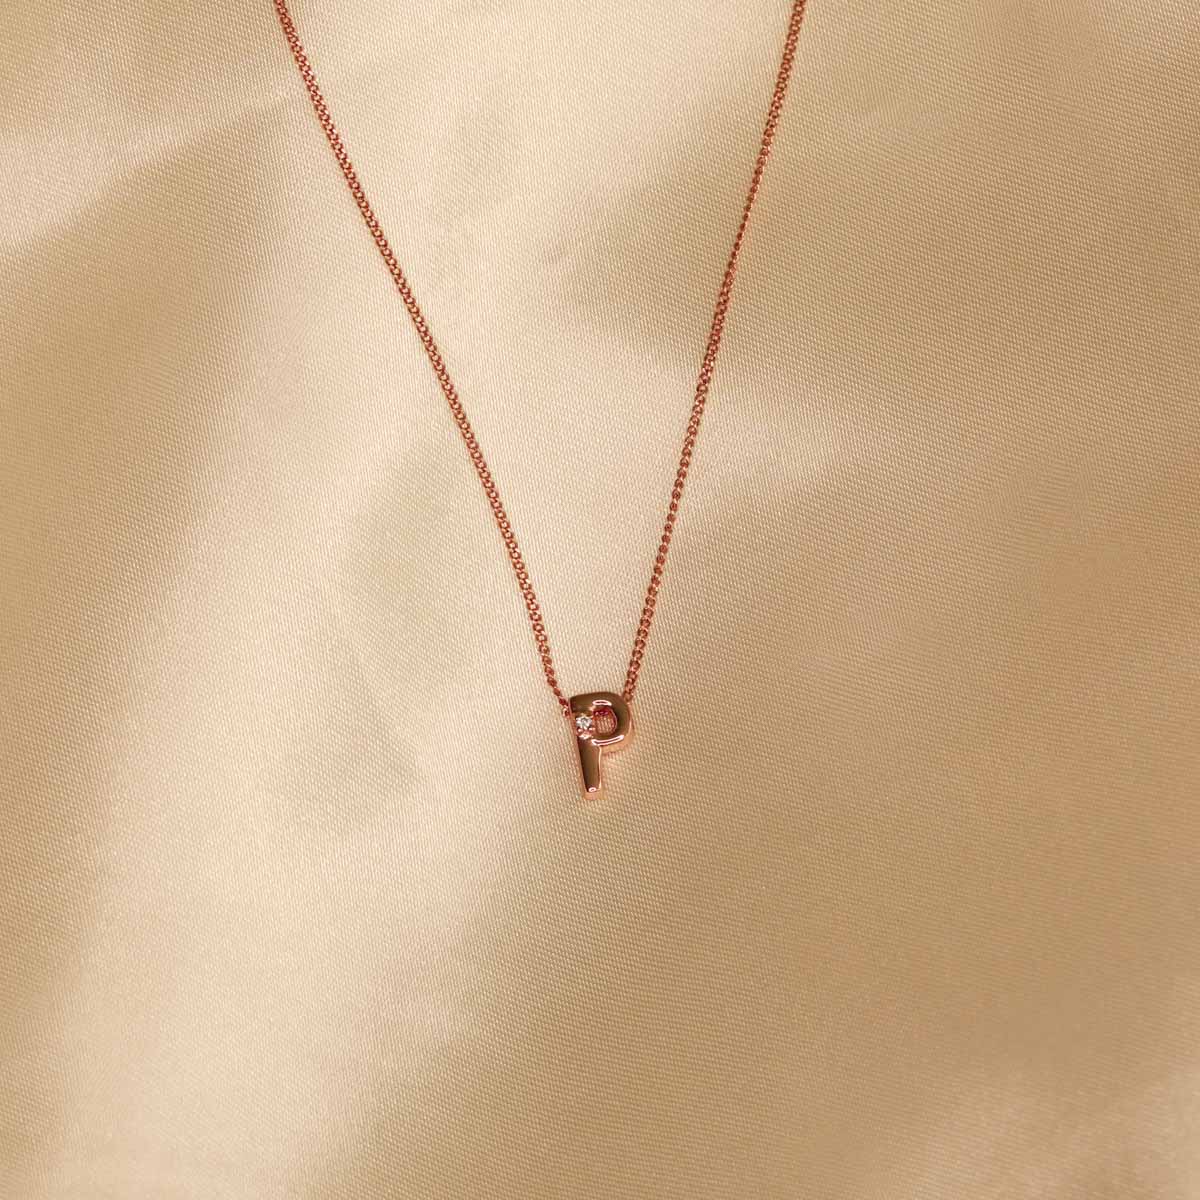 Flat lay shot of P Initial Pendant Necklace in Rose Gold